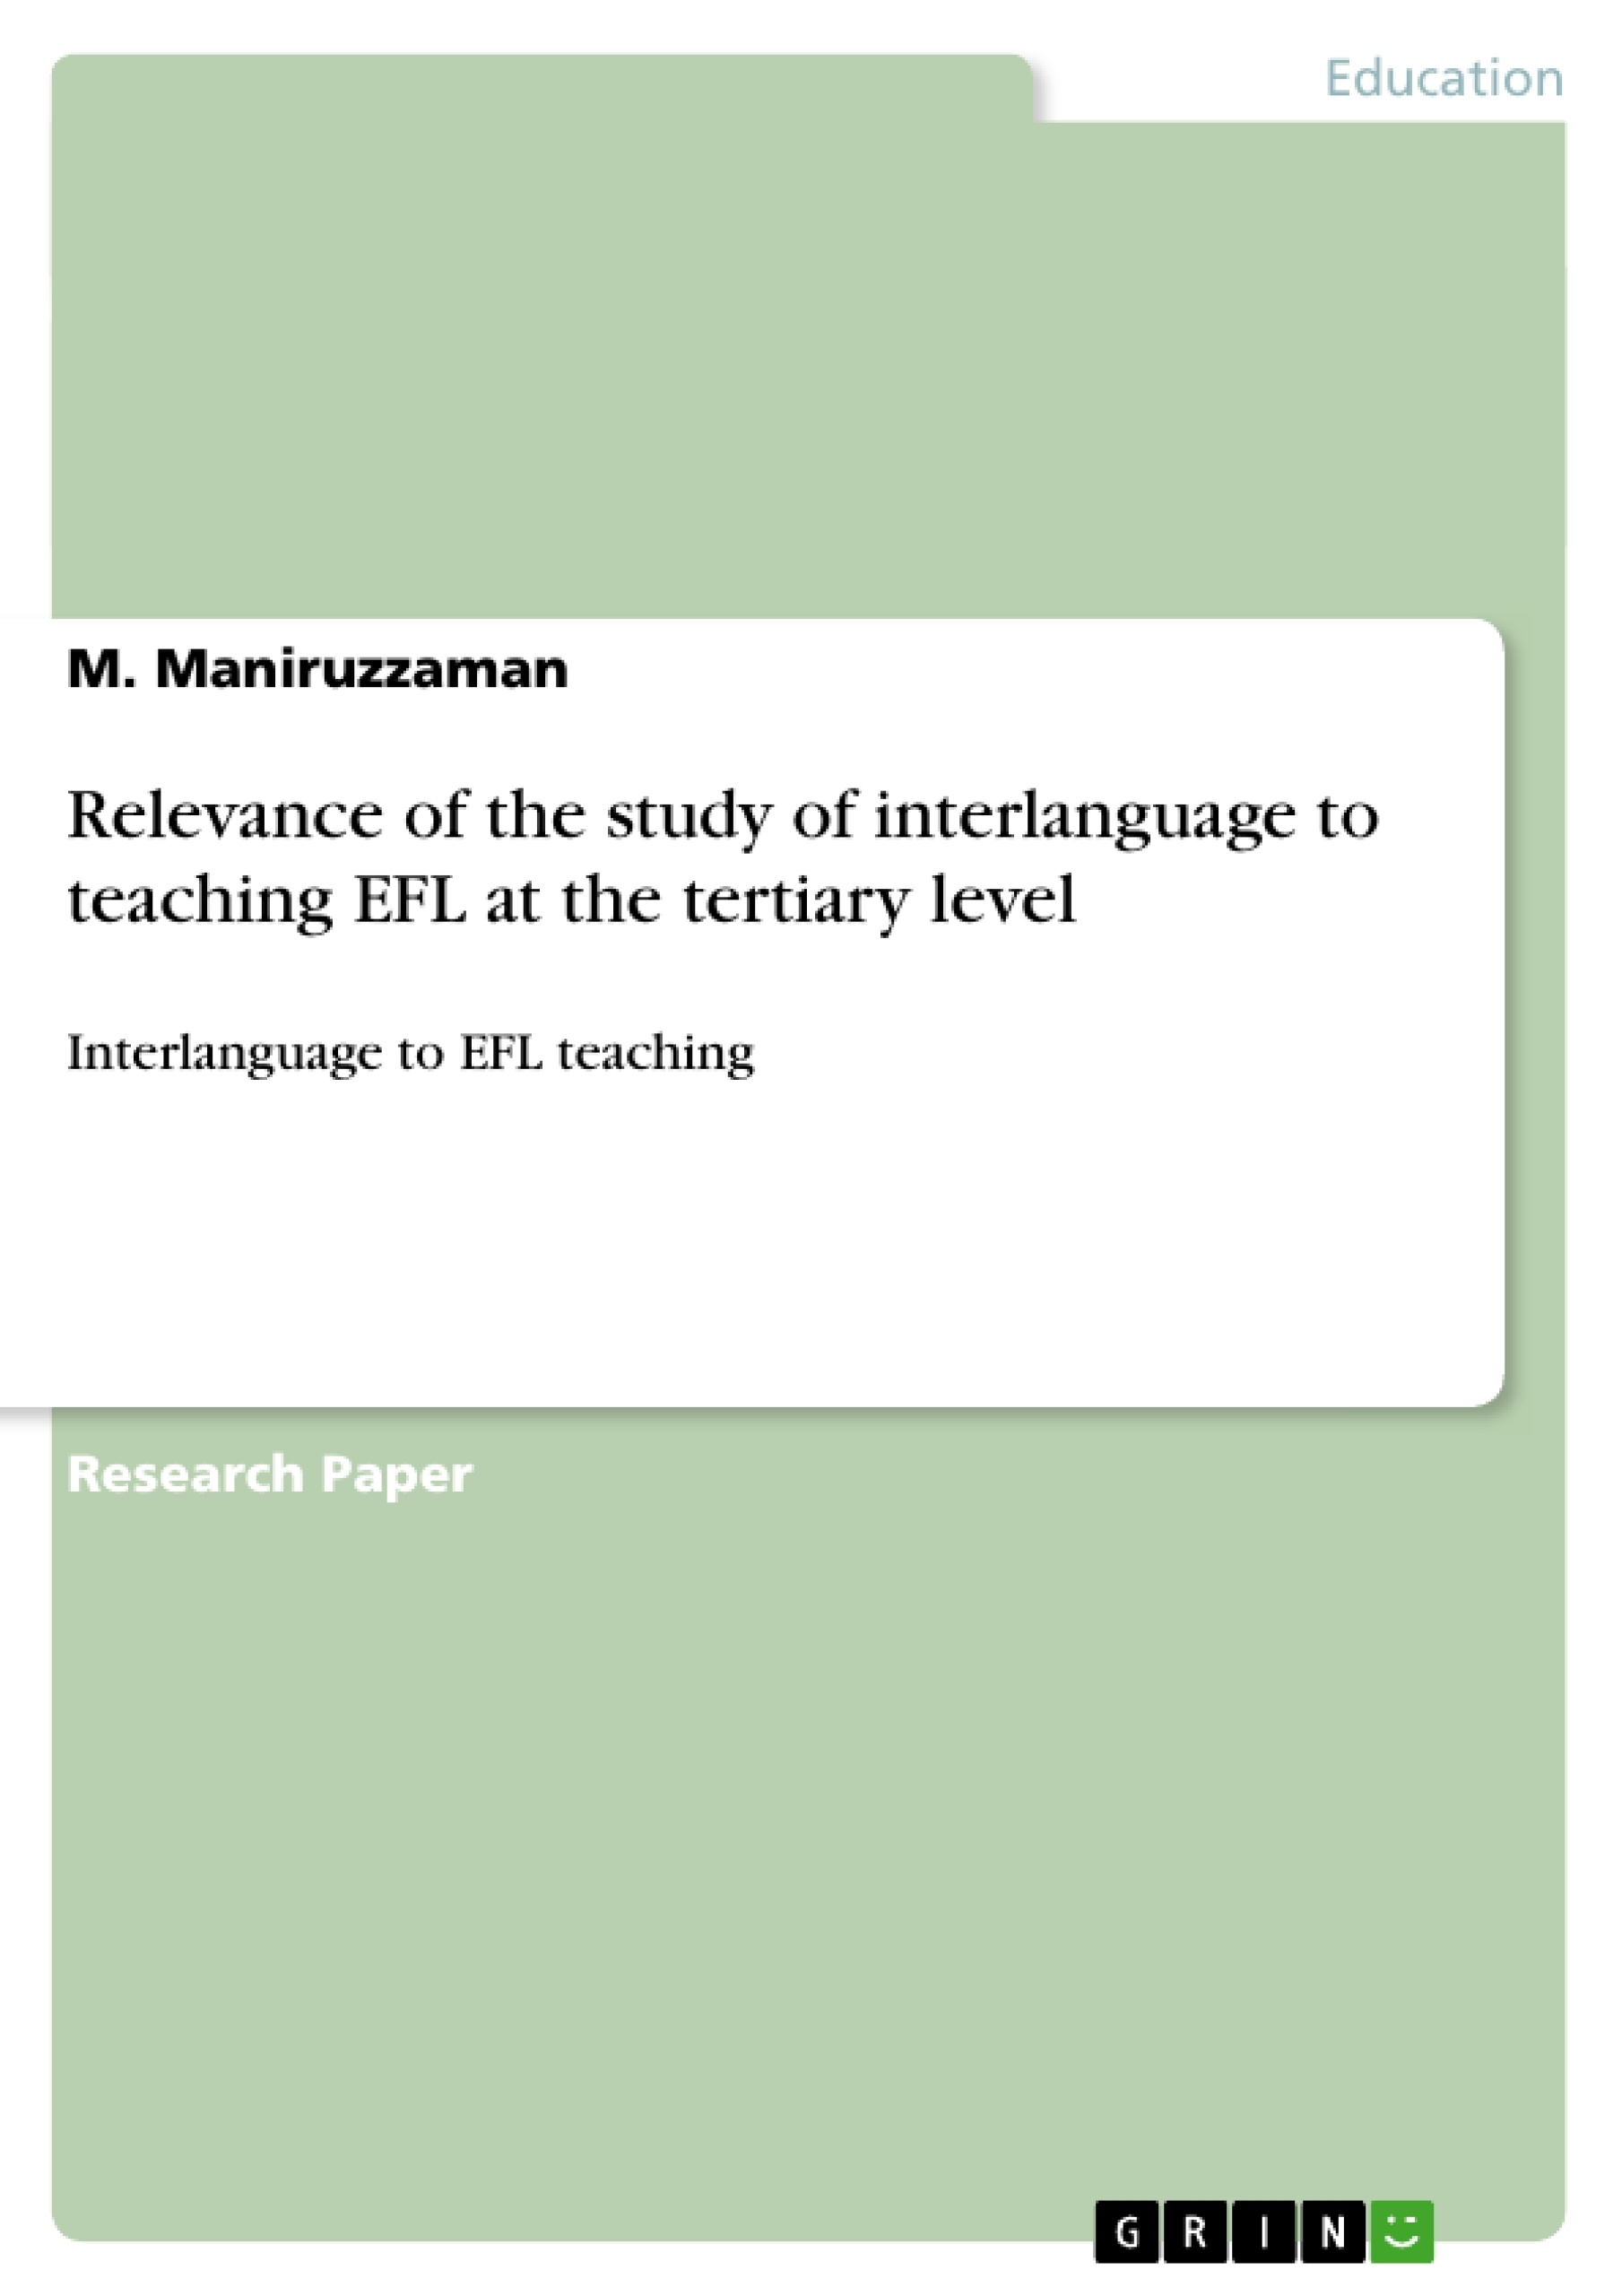 Title: Relevance of the study of interlanguage to teaching EFL at the tertiary level